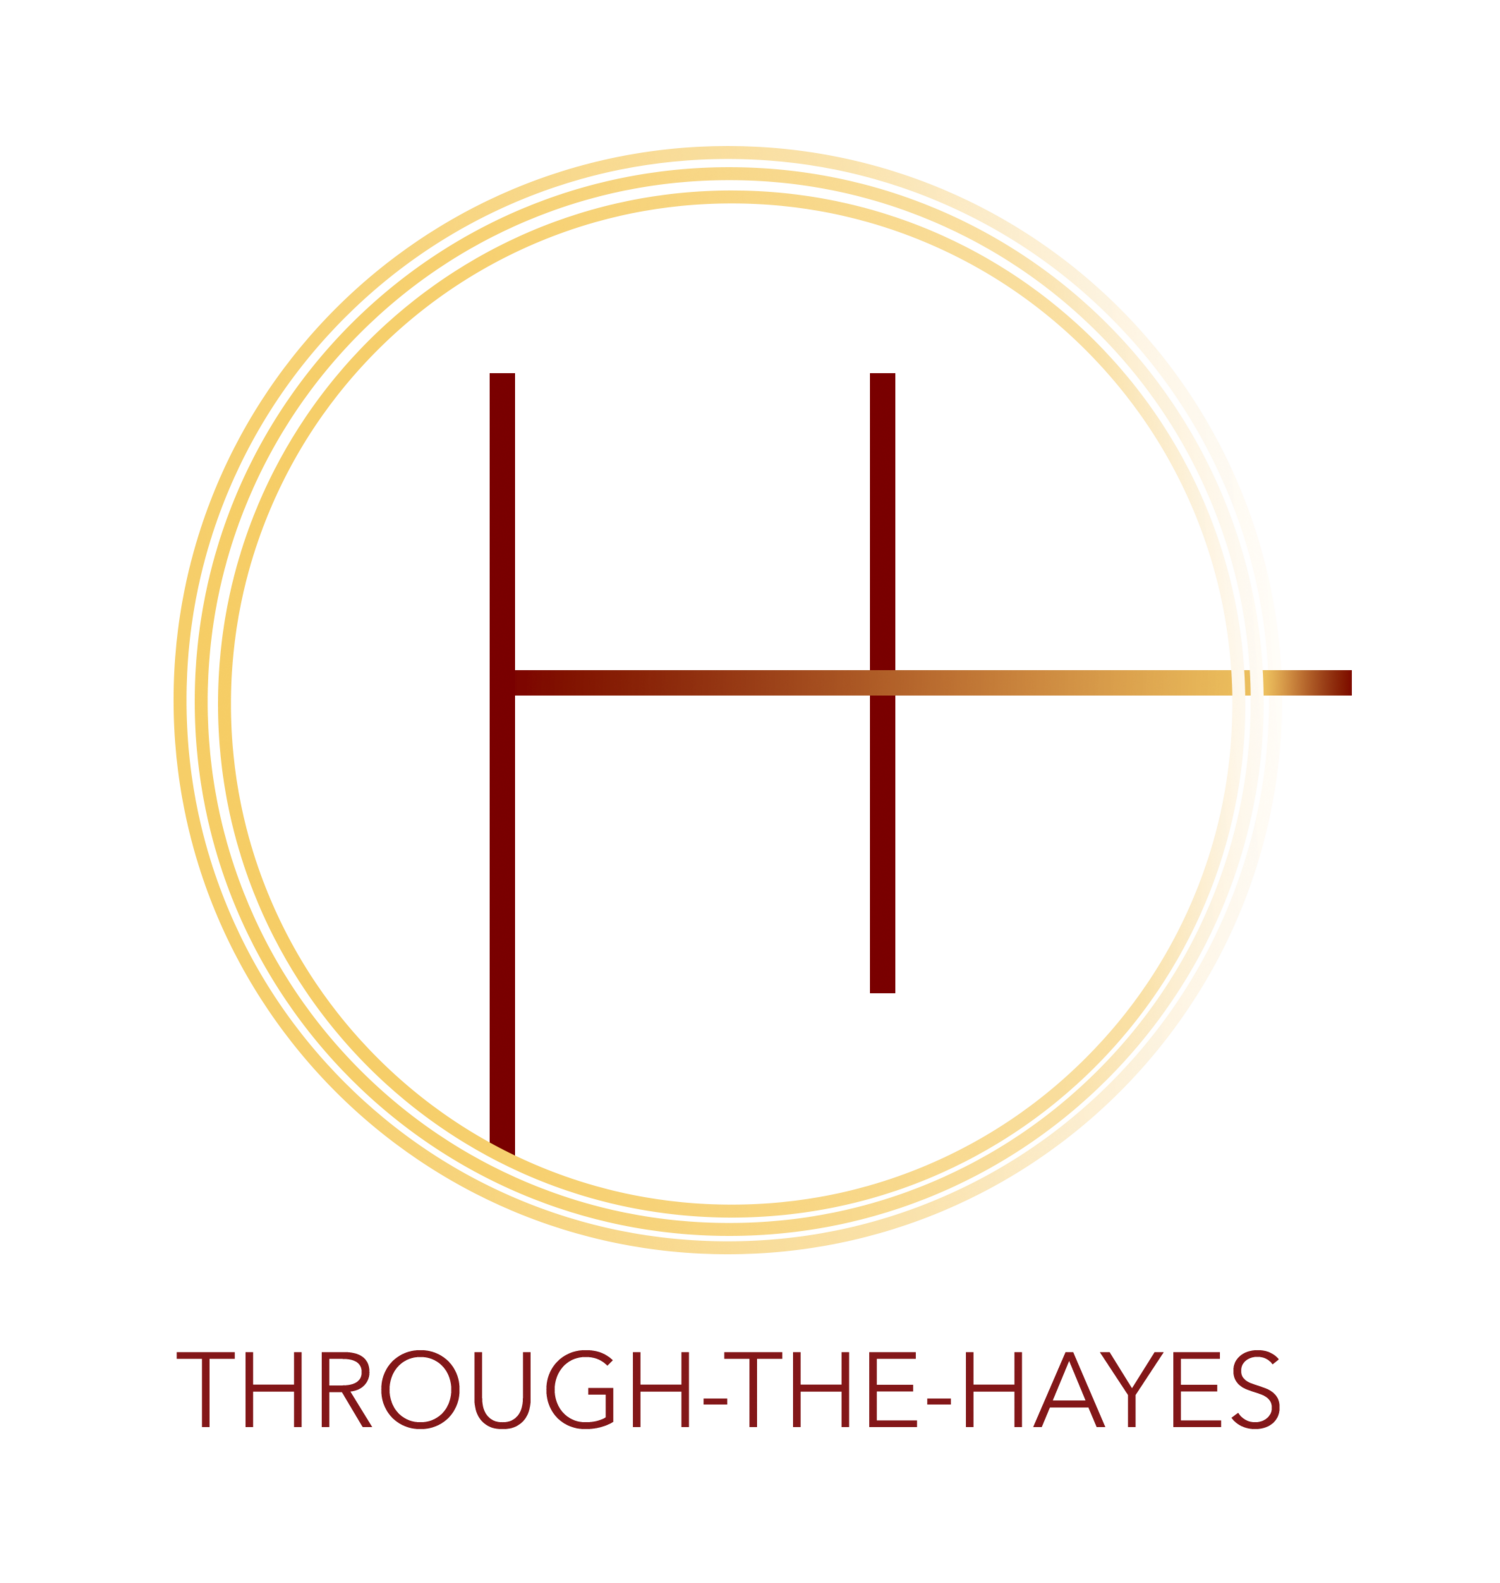 Through-The-Hayes